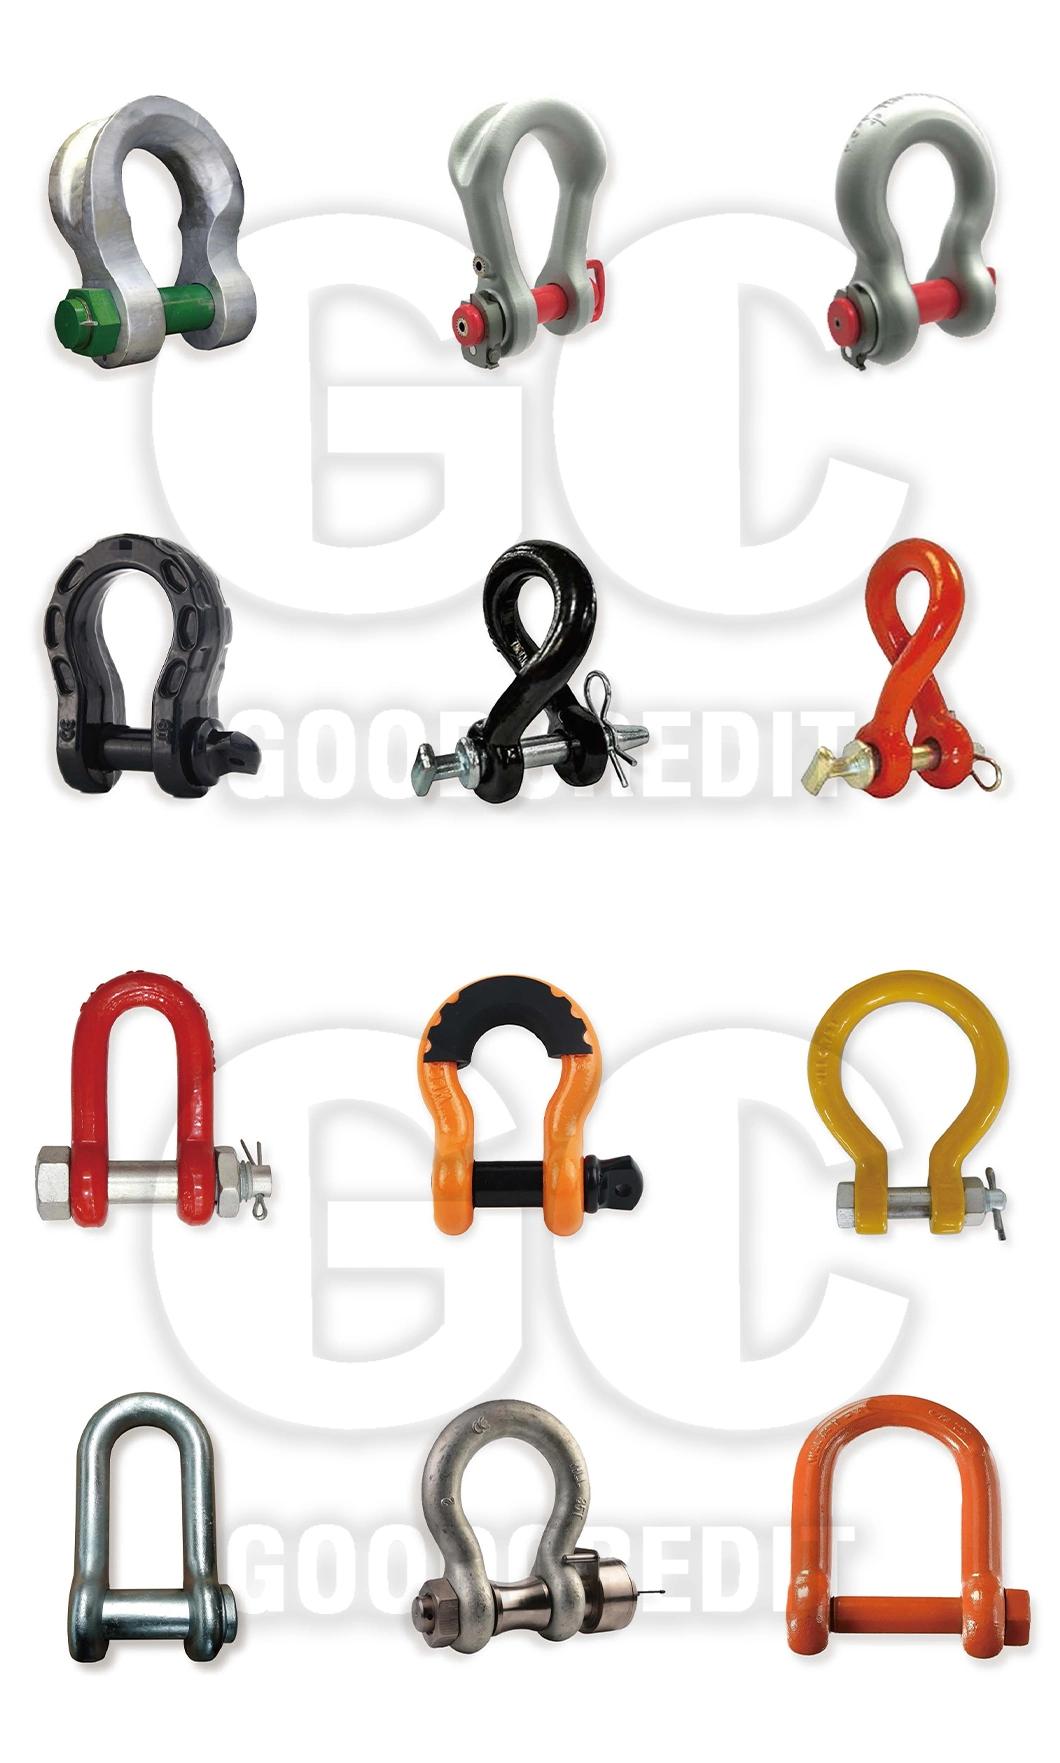 China Factory Wholesale Hardware Rigging Electric Galvanized U Shaped Shackle Us Type Steel Drop Forged Screw Pin D Anchor Shackle